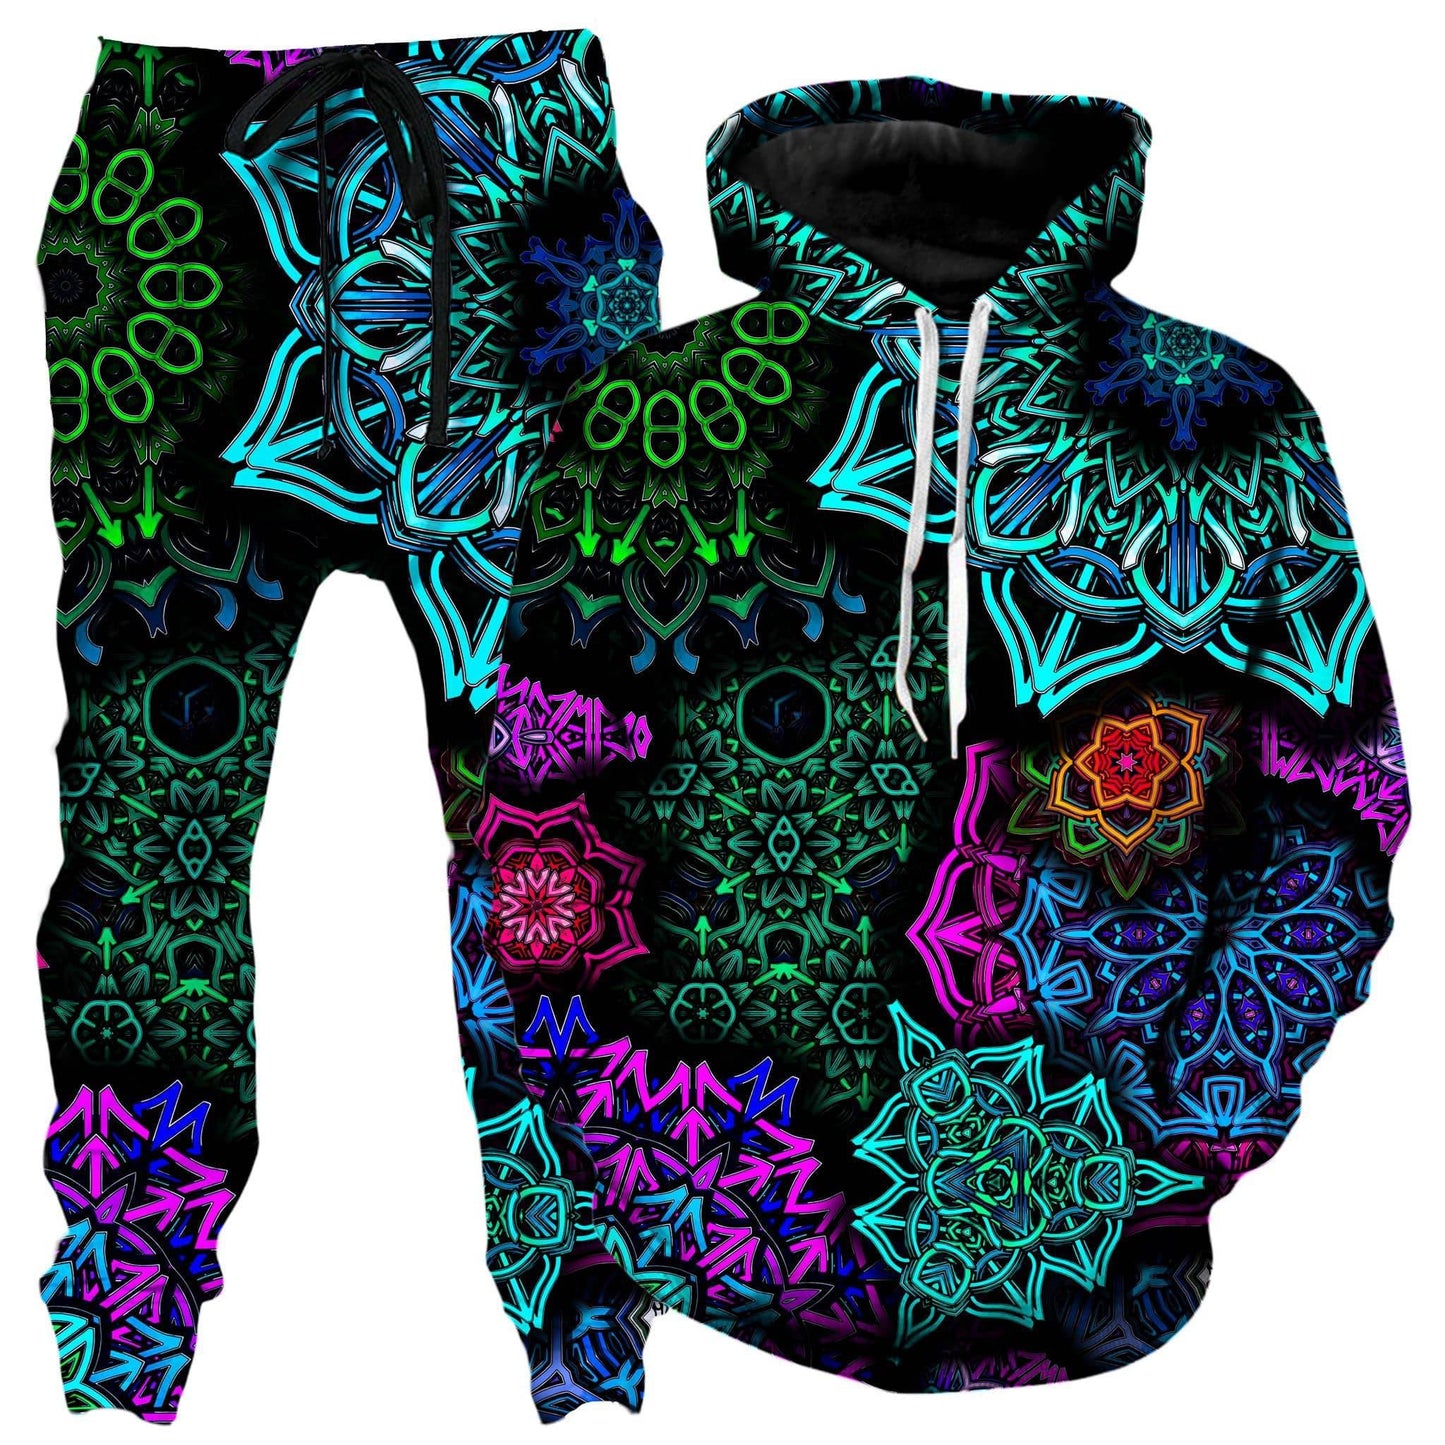 Space Invasion Hoodie and Joggers Combo, Jan Kruse, | iEDM